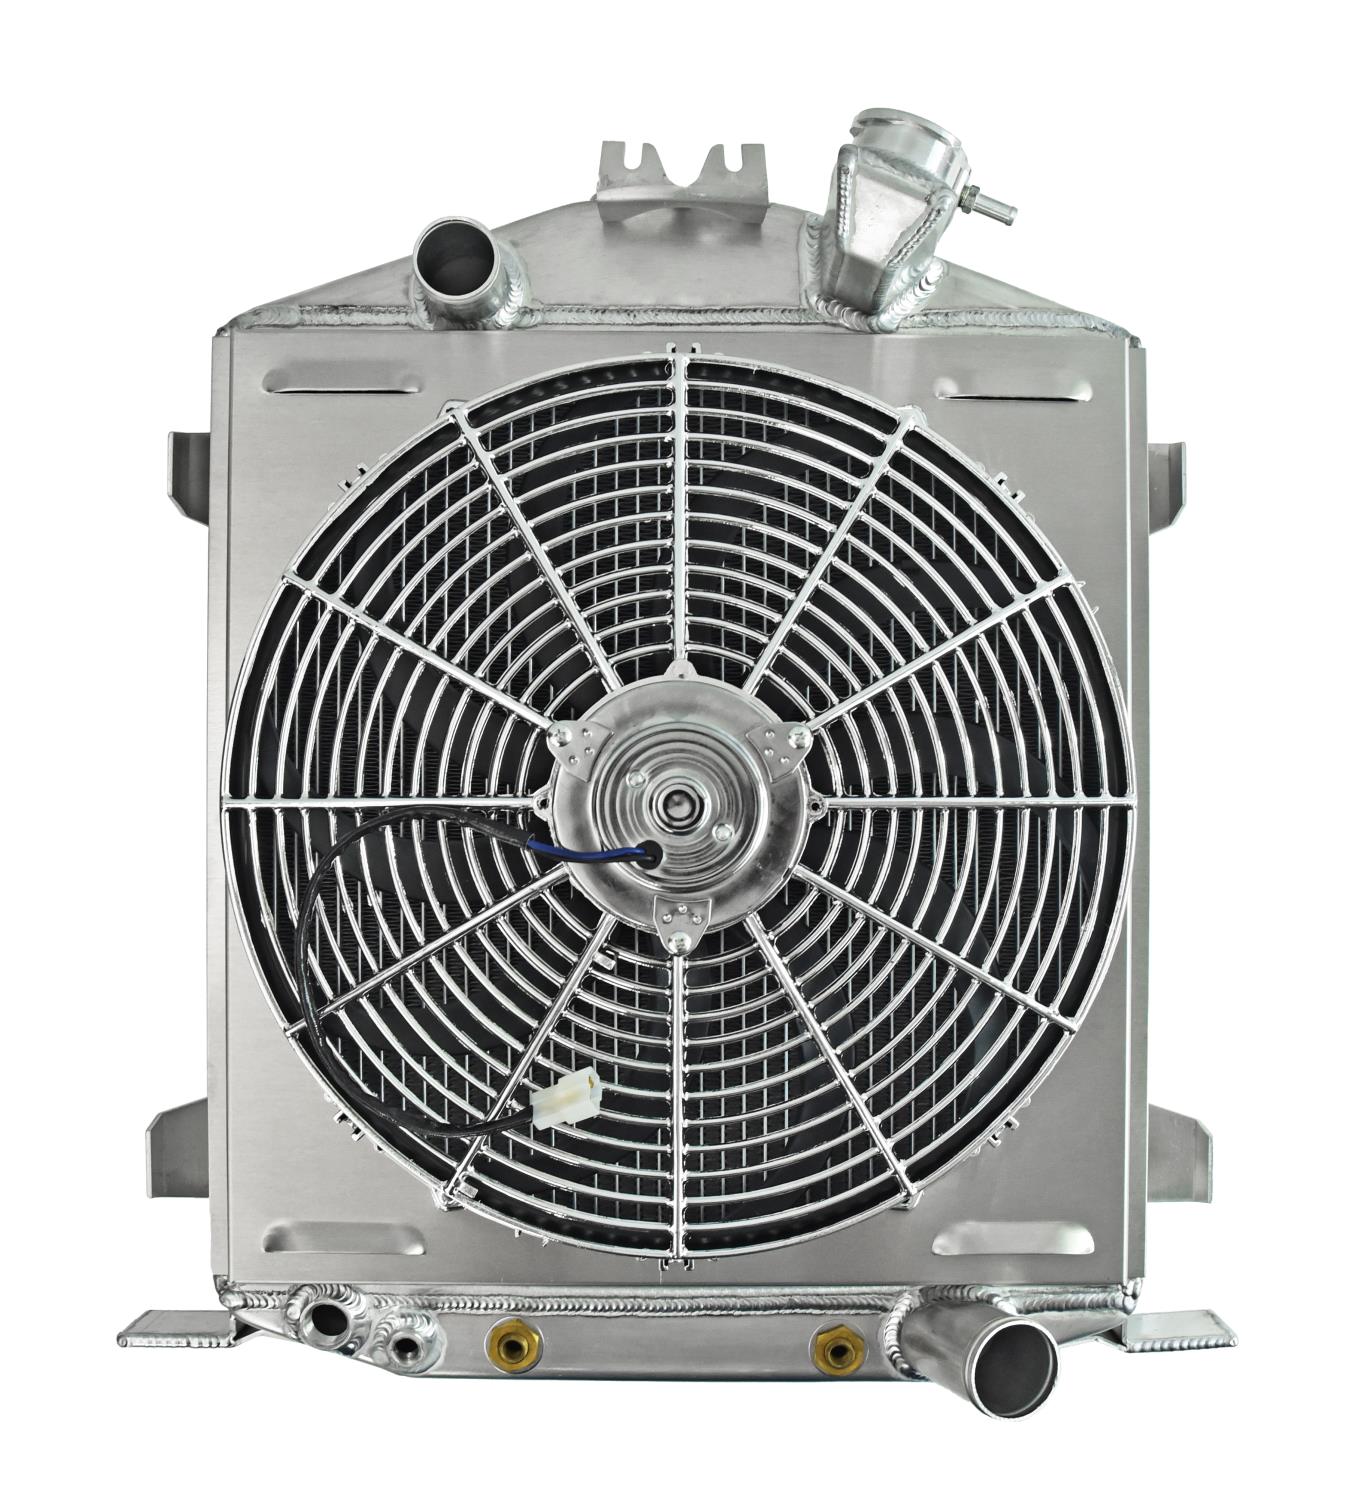 Aluminum Radiator & Fan Combo for 1932 Ford LO-BOY with Chevy V8 Engine & Chopped Grill [16 in. FAN]